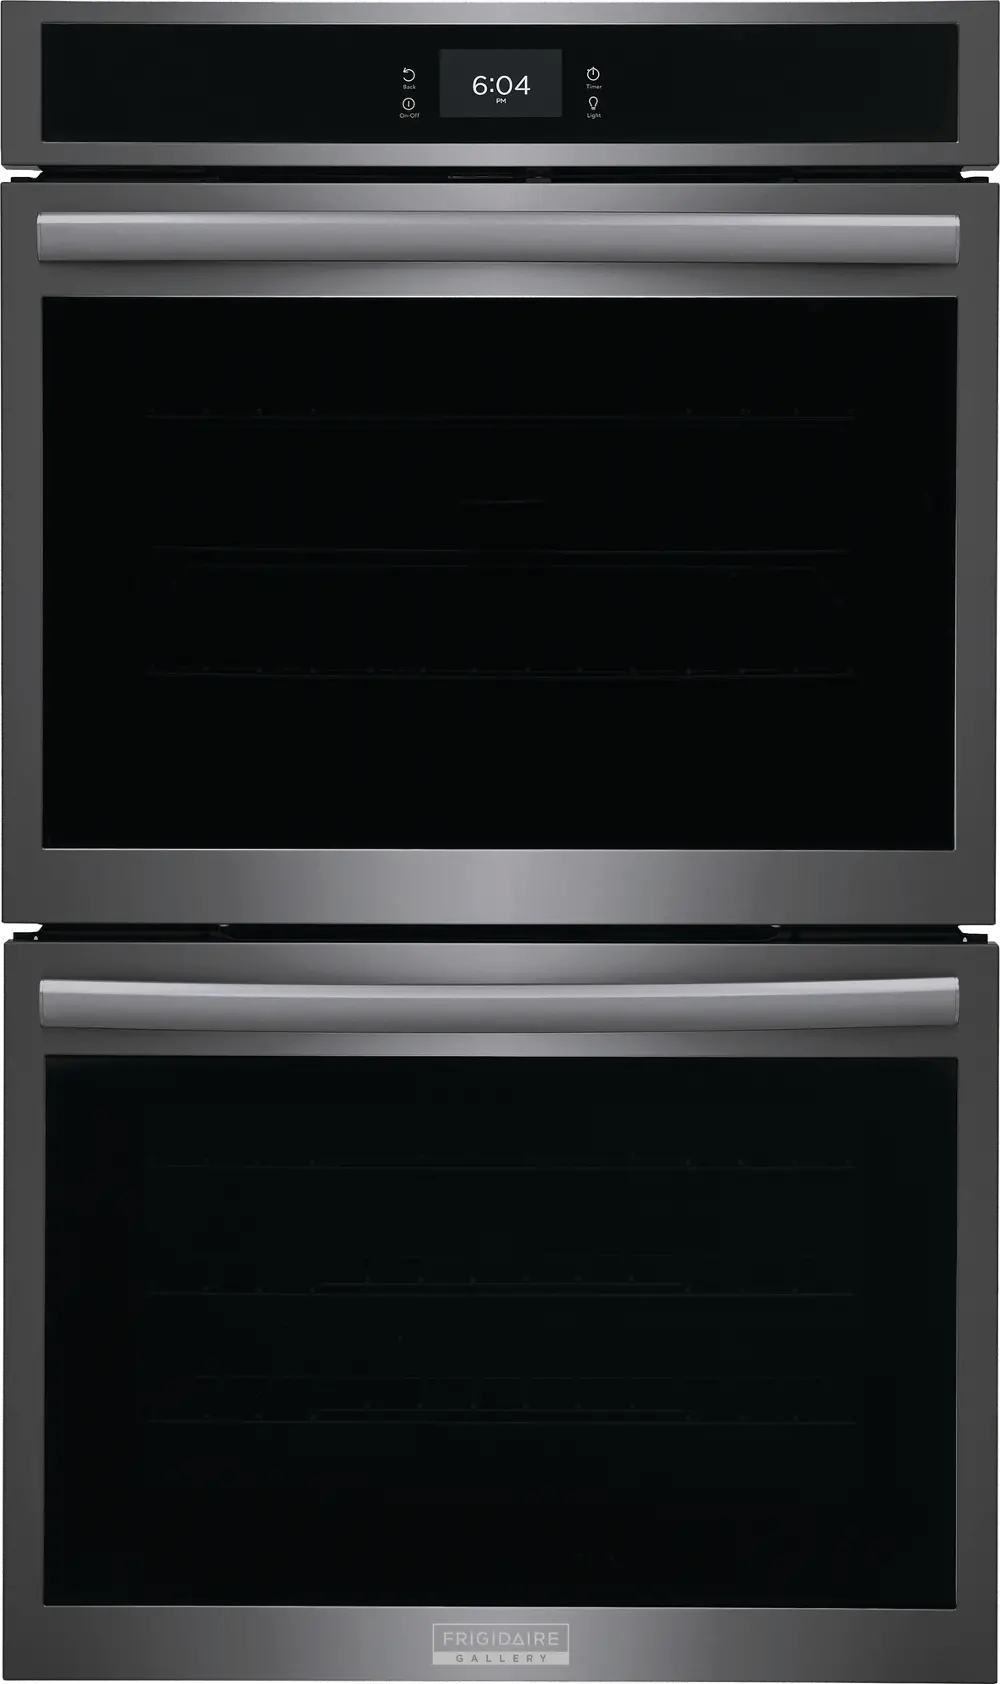 GCWD3067AD Frigidaire Gallery 10.6 cu ft Double Wall Oven - Black Stainless Steel 30 Inch-1